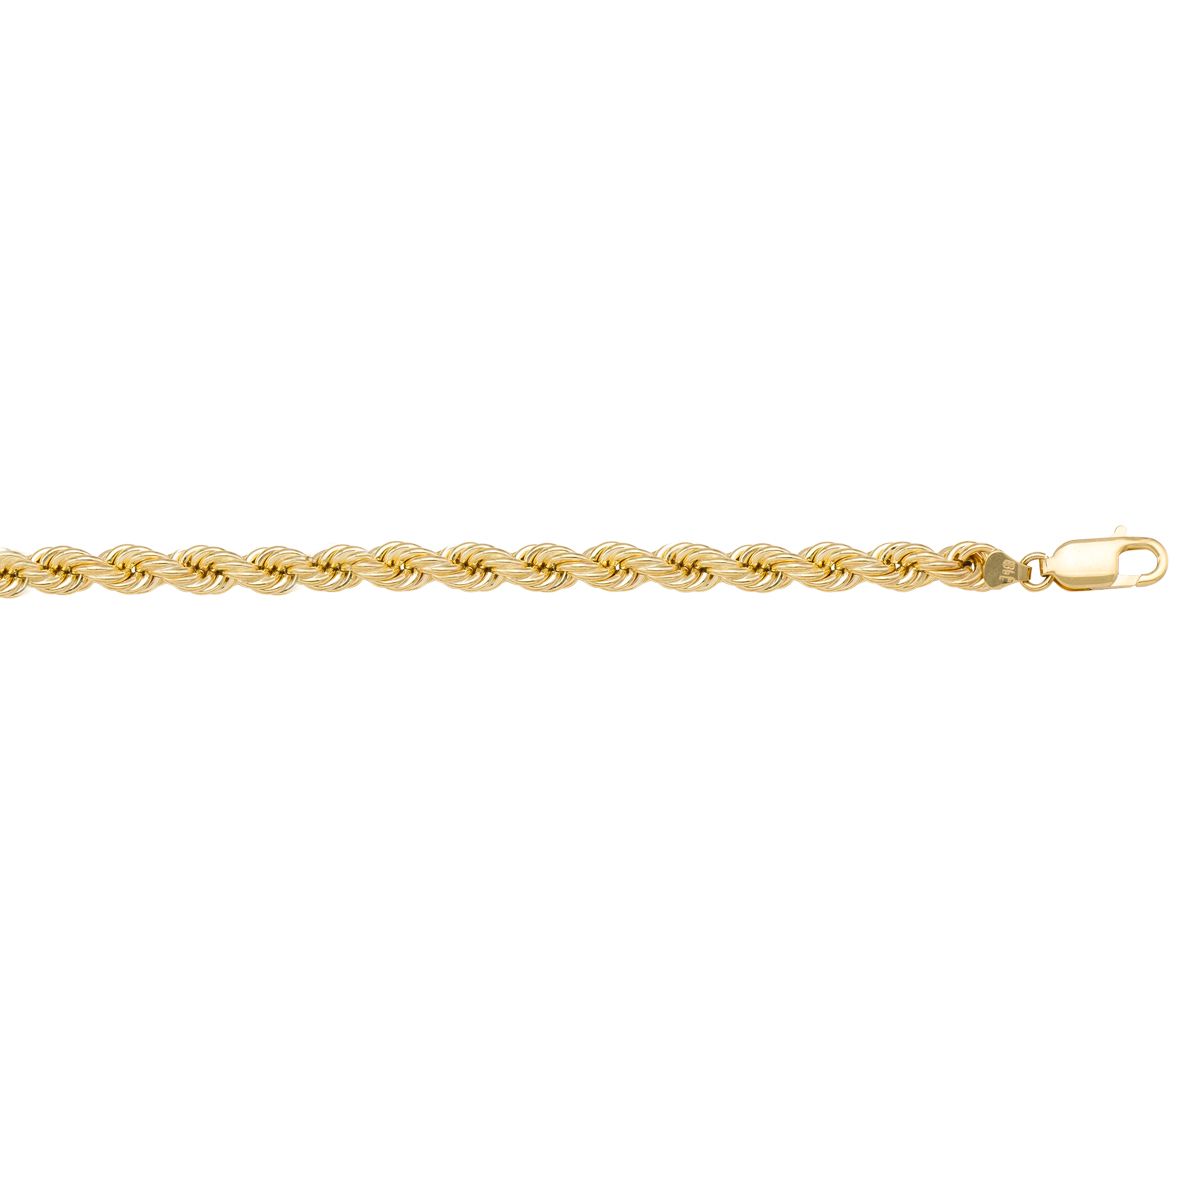 CROP01, Gold Bracelet, Hollow Rope, Yellow Gold